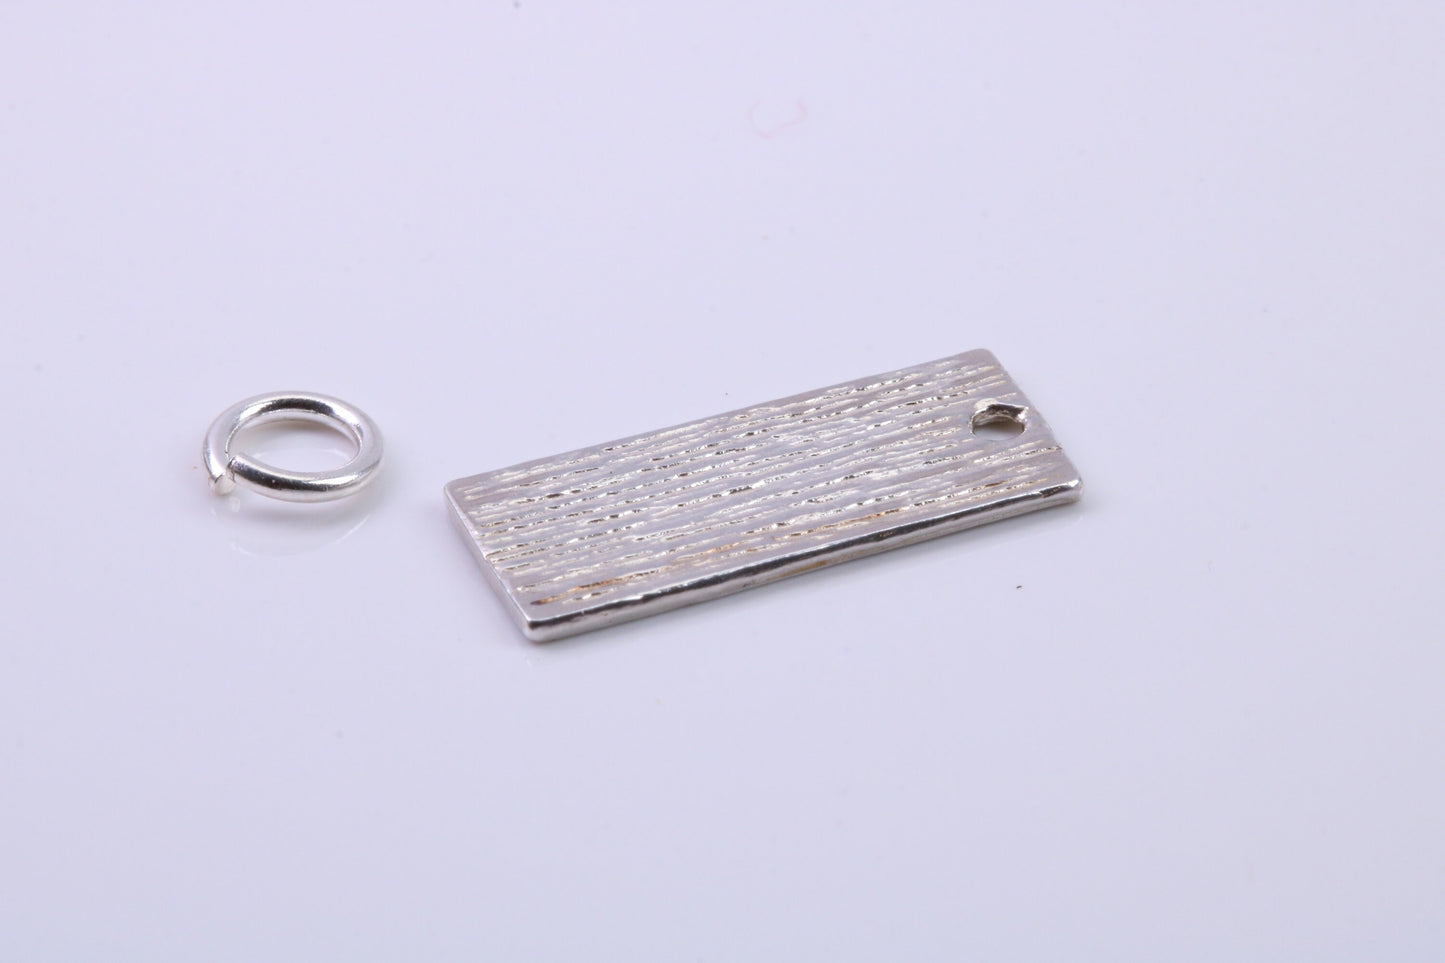 100 Dollar Bill Charm, Traditional Charm, Made from Solid 925 Grade Sterling Silver, Complete with Attachment Link